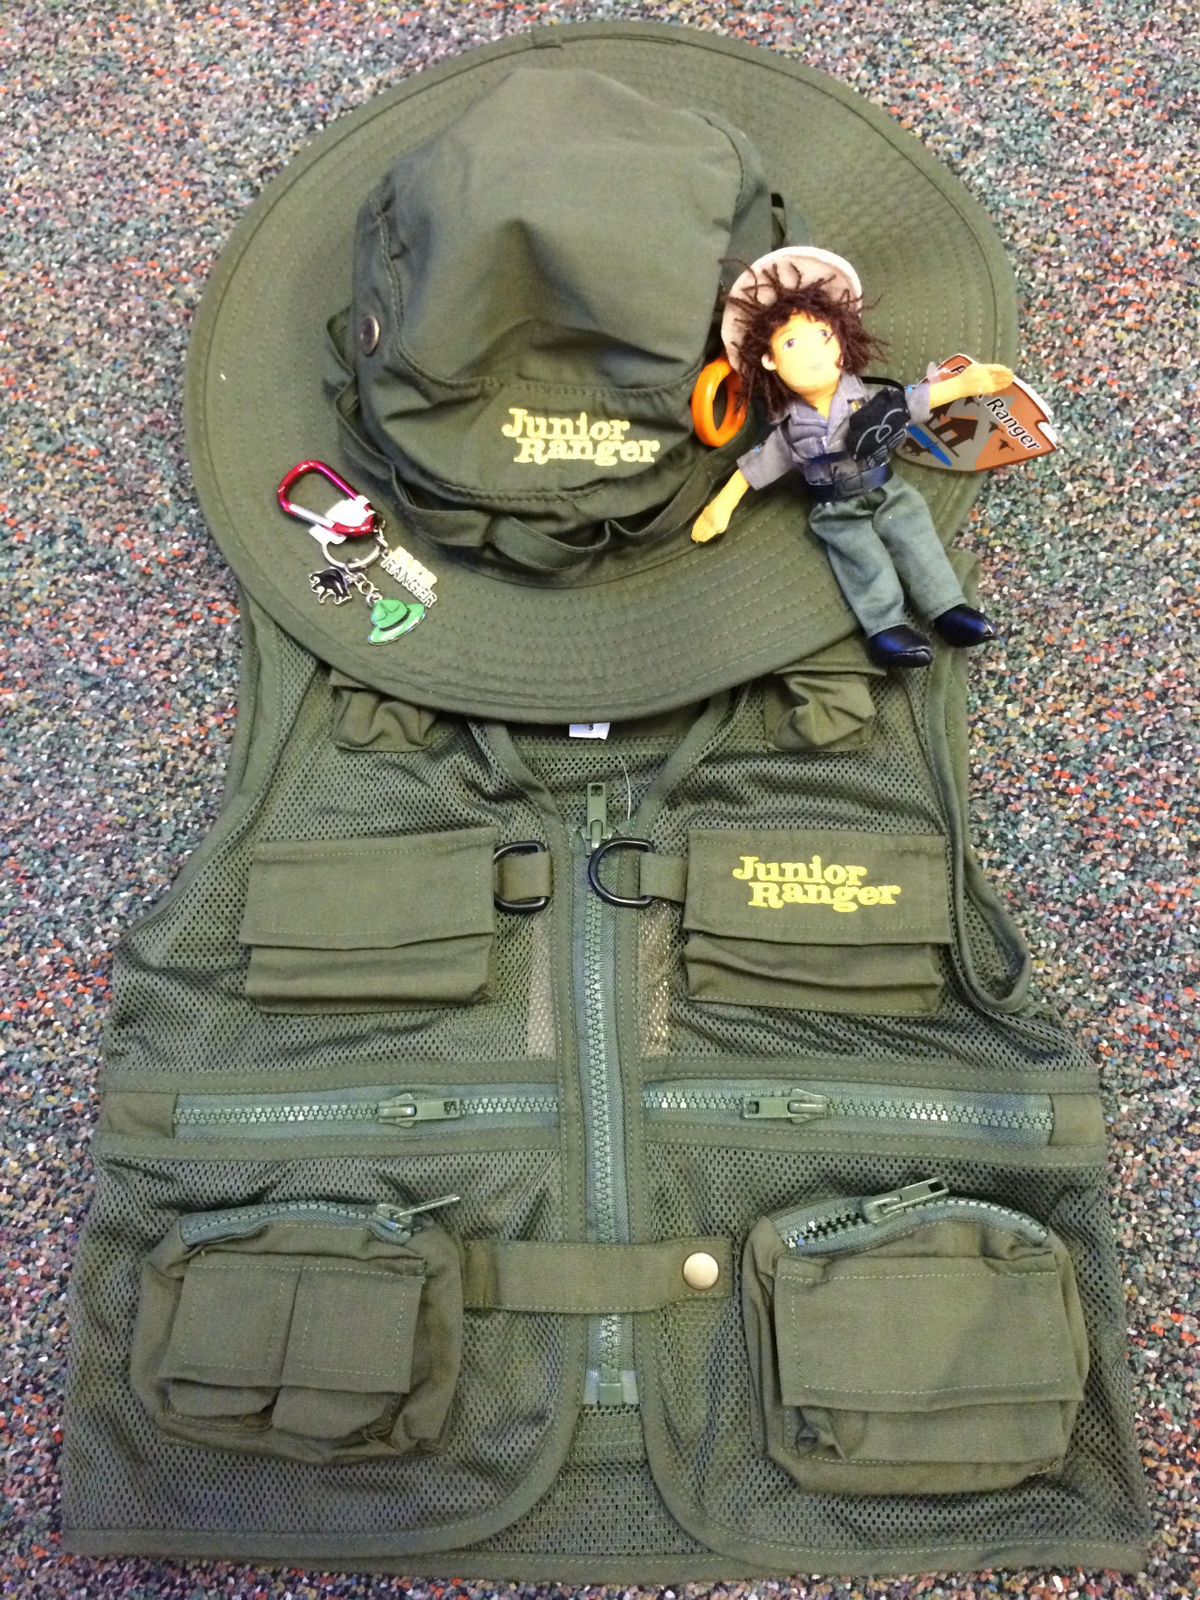 Junior Ranger items for sale in the bookstore